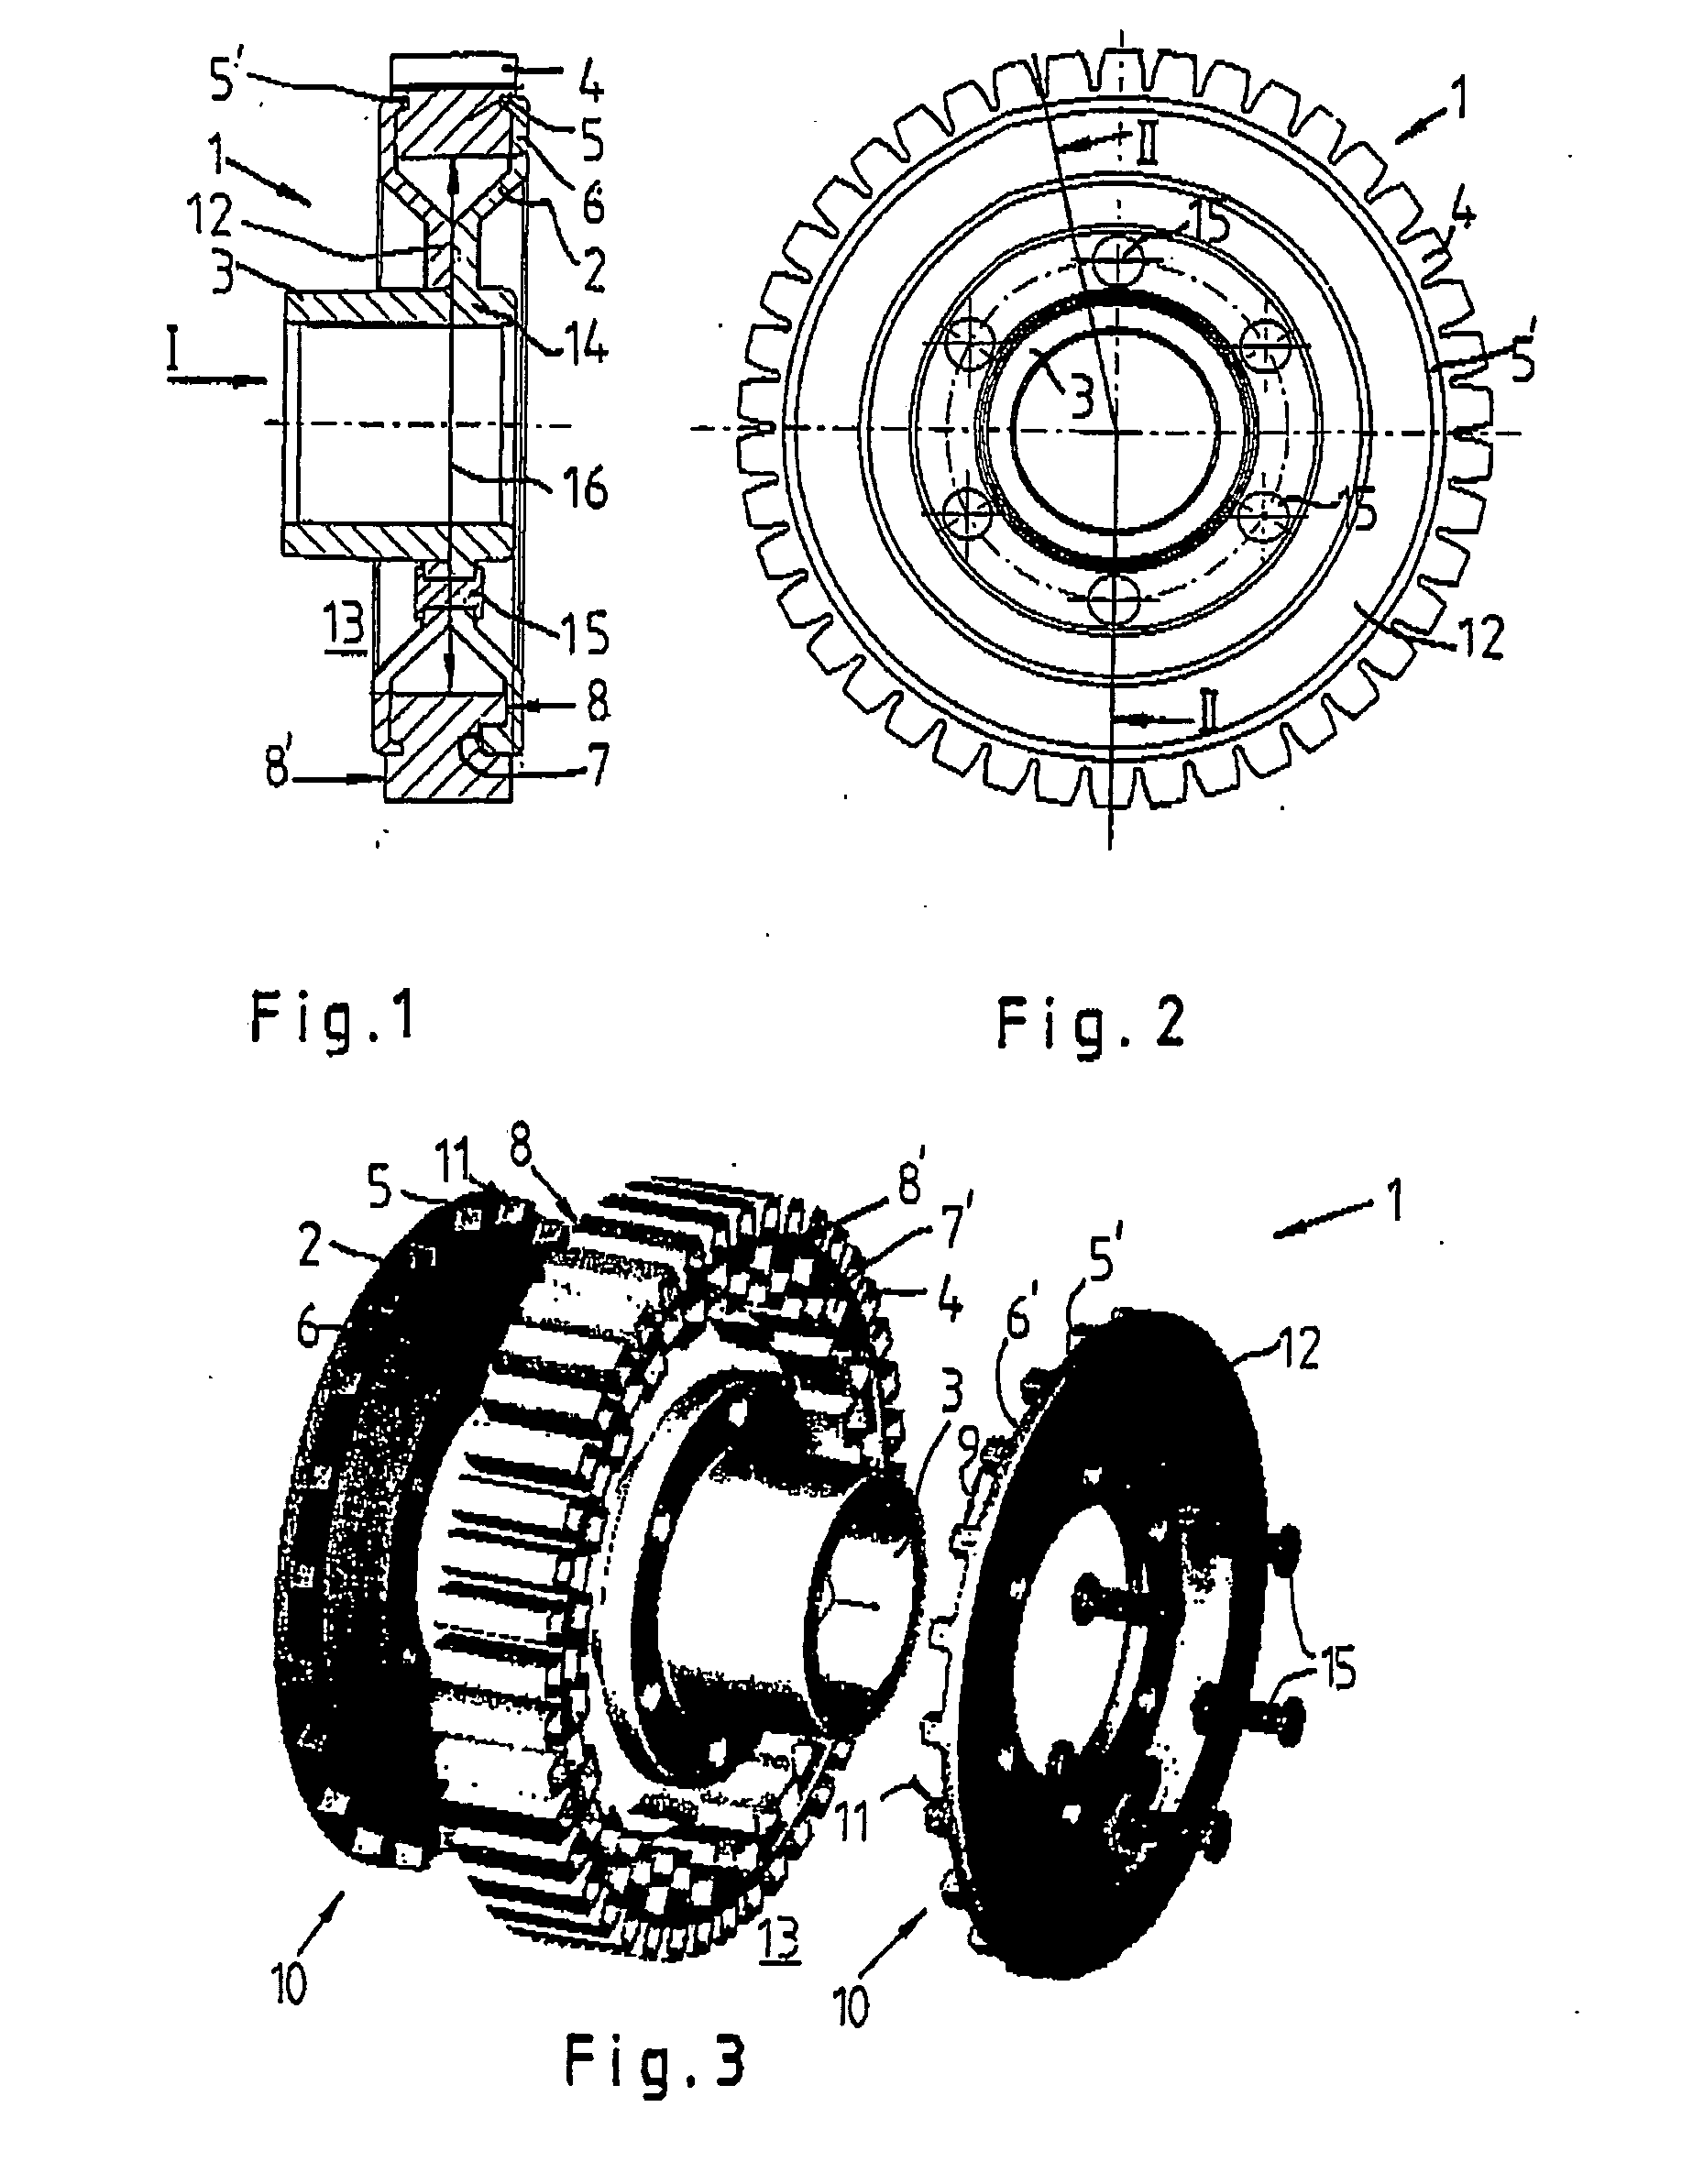 Power-Assisted Steering System or Power Steering System